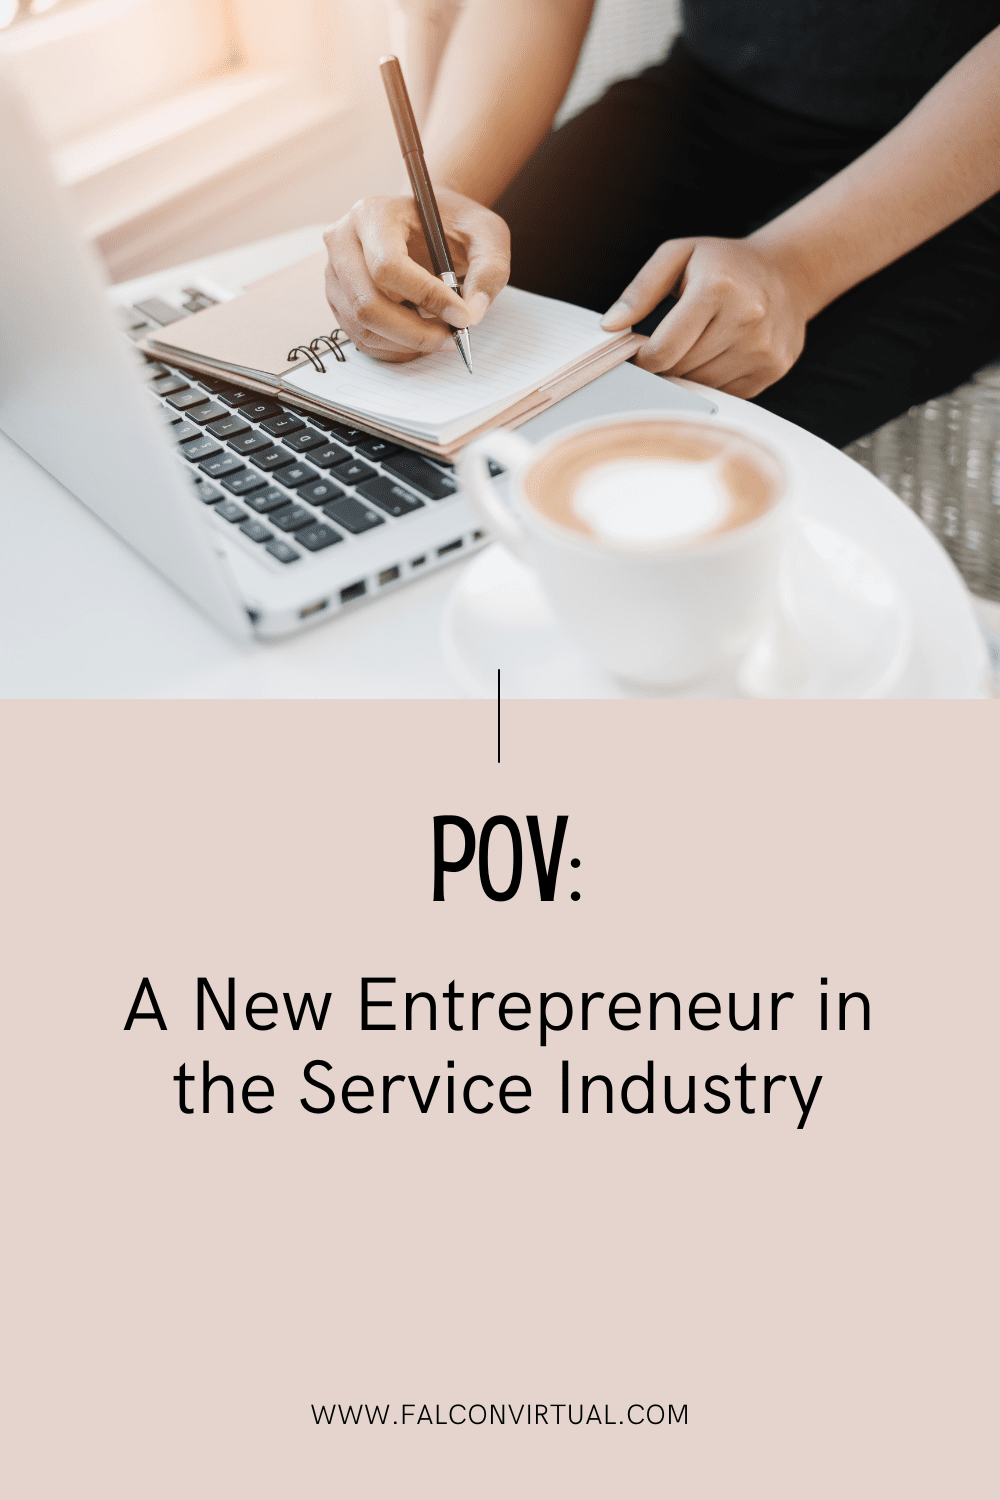 POV: A New Entrepreneur in the Service Industry